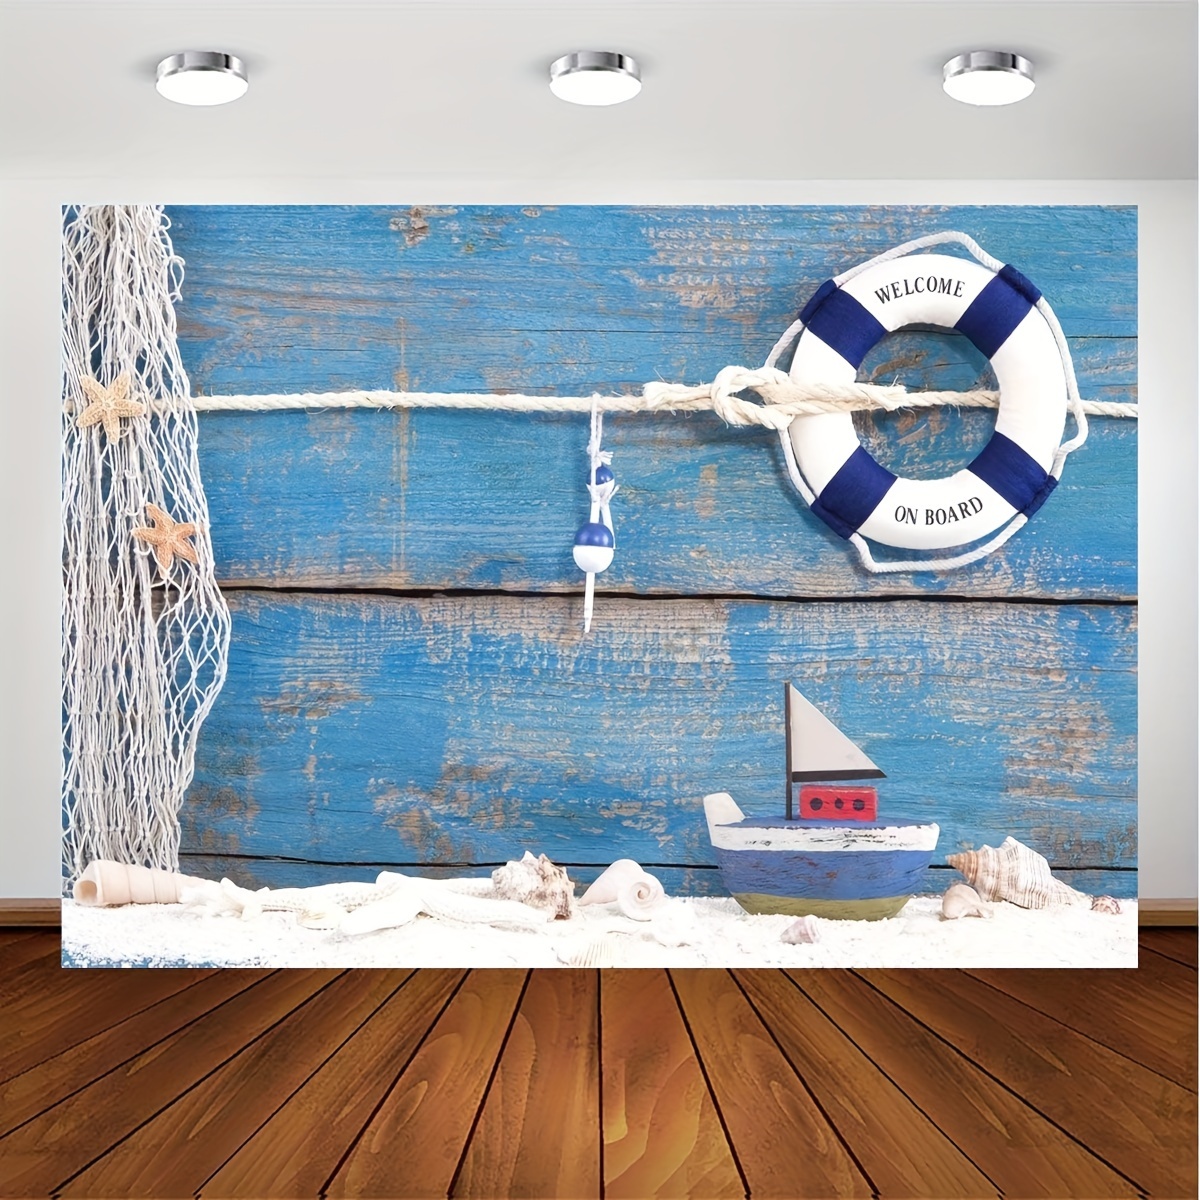 facefd Decorative Fishing Net Wall Decor with Nautical Style Wall Hangings  Ornament 